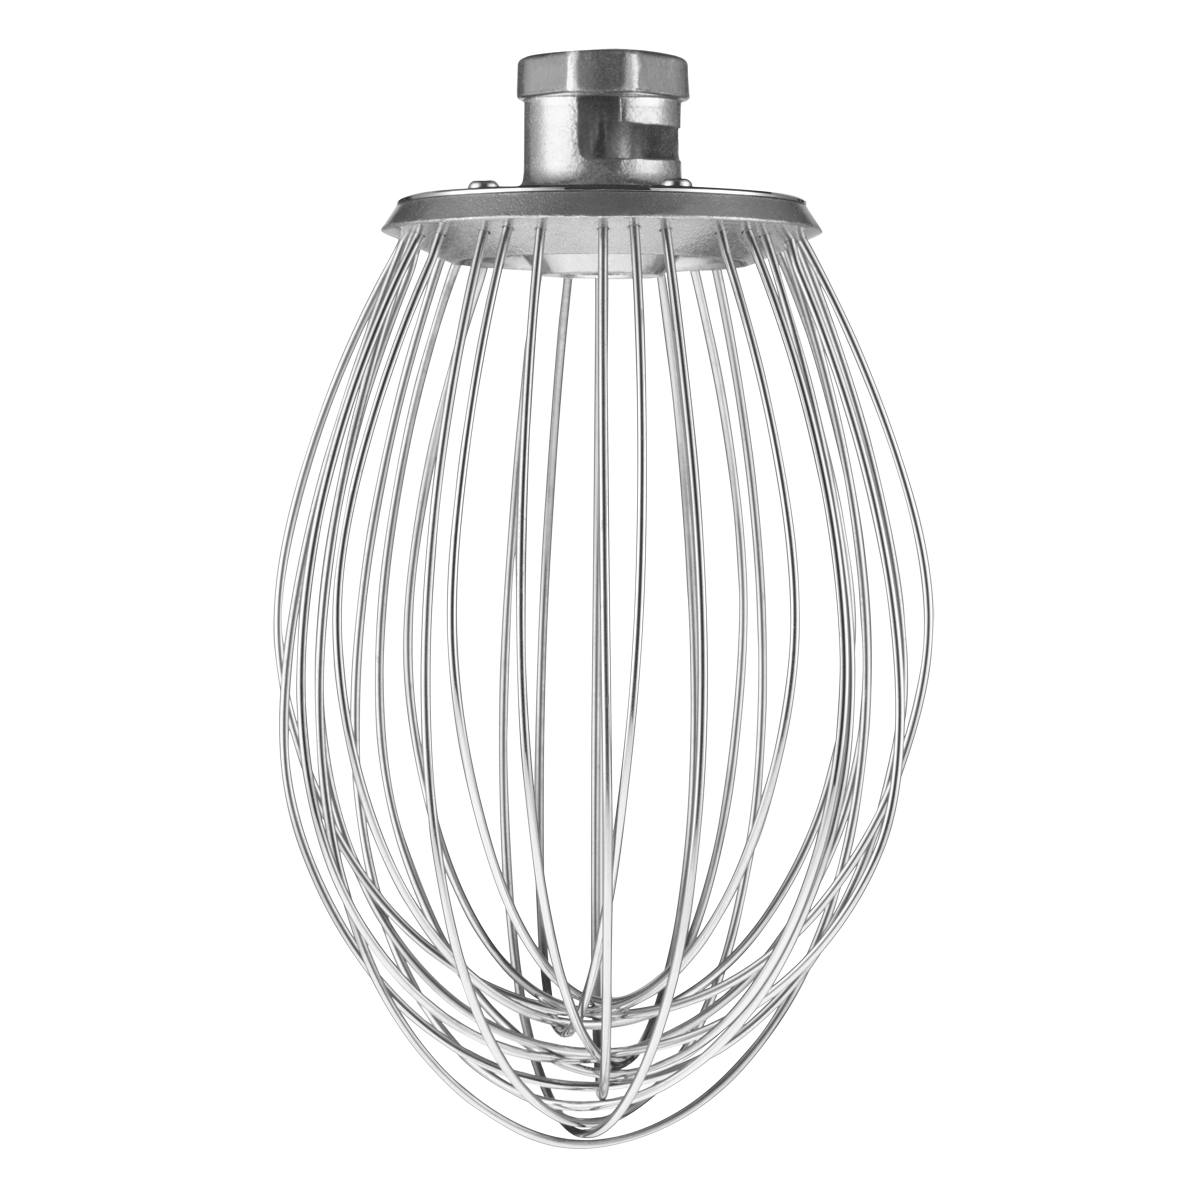 https://www.waringlab.com/assets/images/database/products/wsm7lw-waring-lab-whisk-main.png